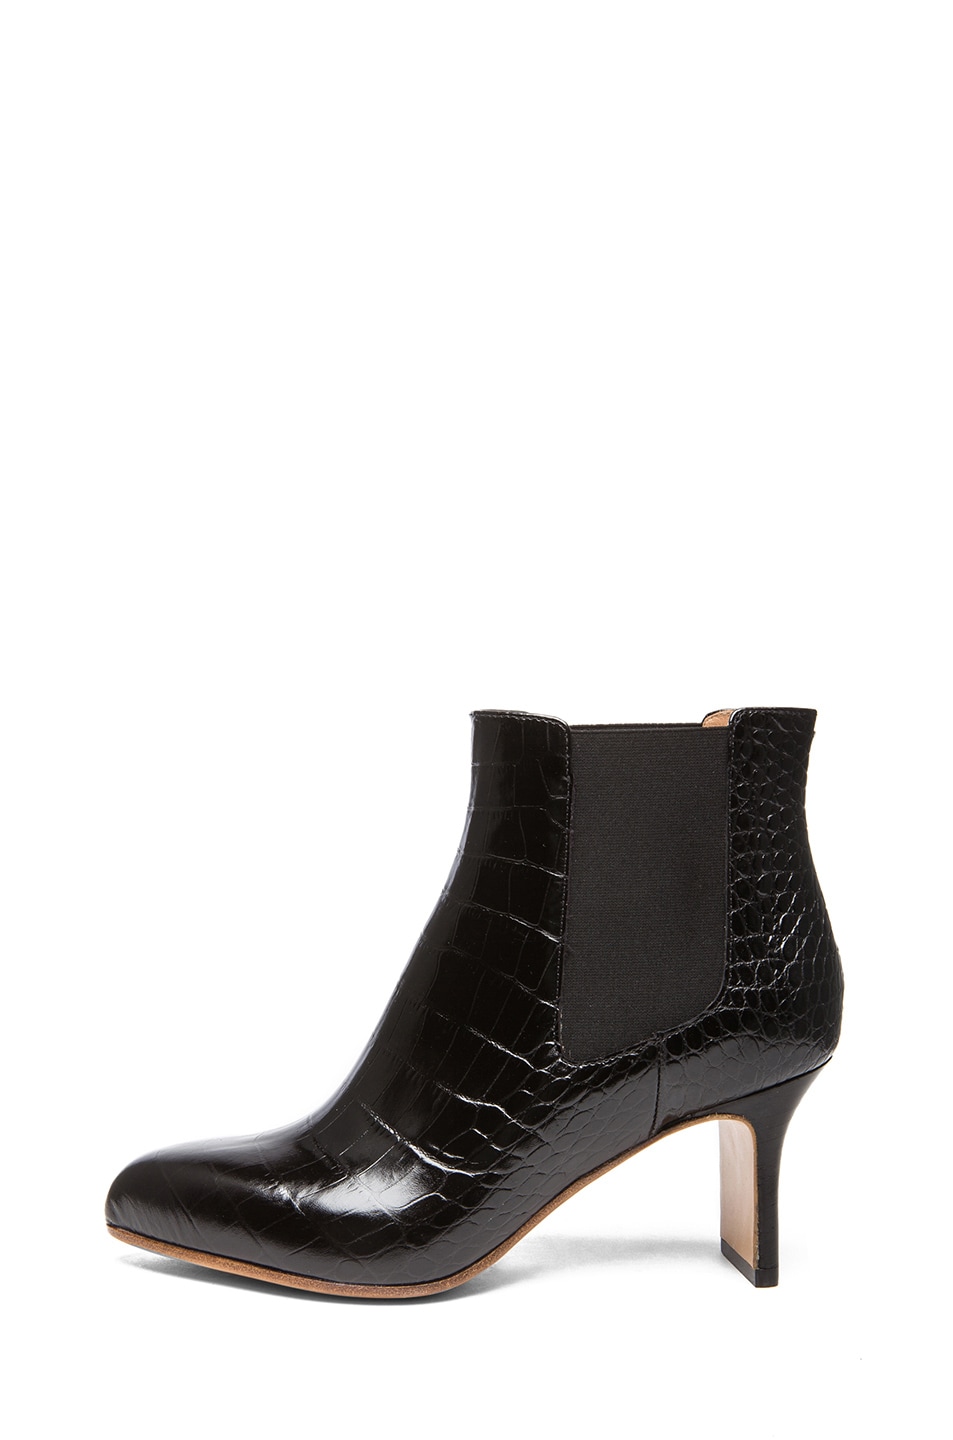 Image 1 of Maison Margiela Croc Embossed Leather Defile Booties in Black